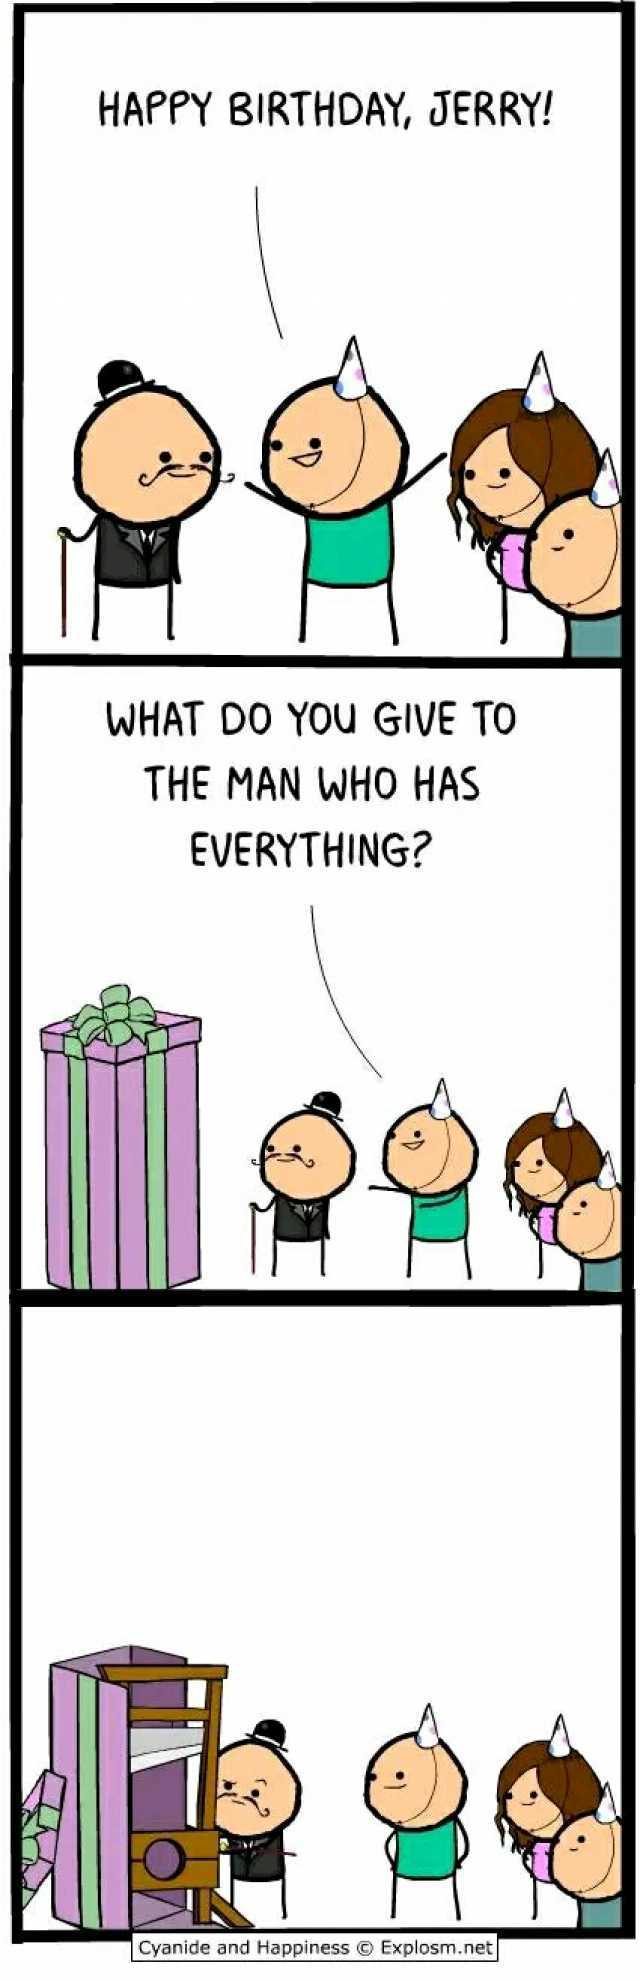 HAPPY BIRTHOAY JERRY! WHAT DO YOu GIVE TO THE MAN WHO HAS EVERYTHING 99 Cyanide and Happiness Explosm.net